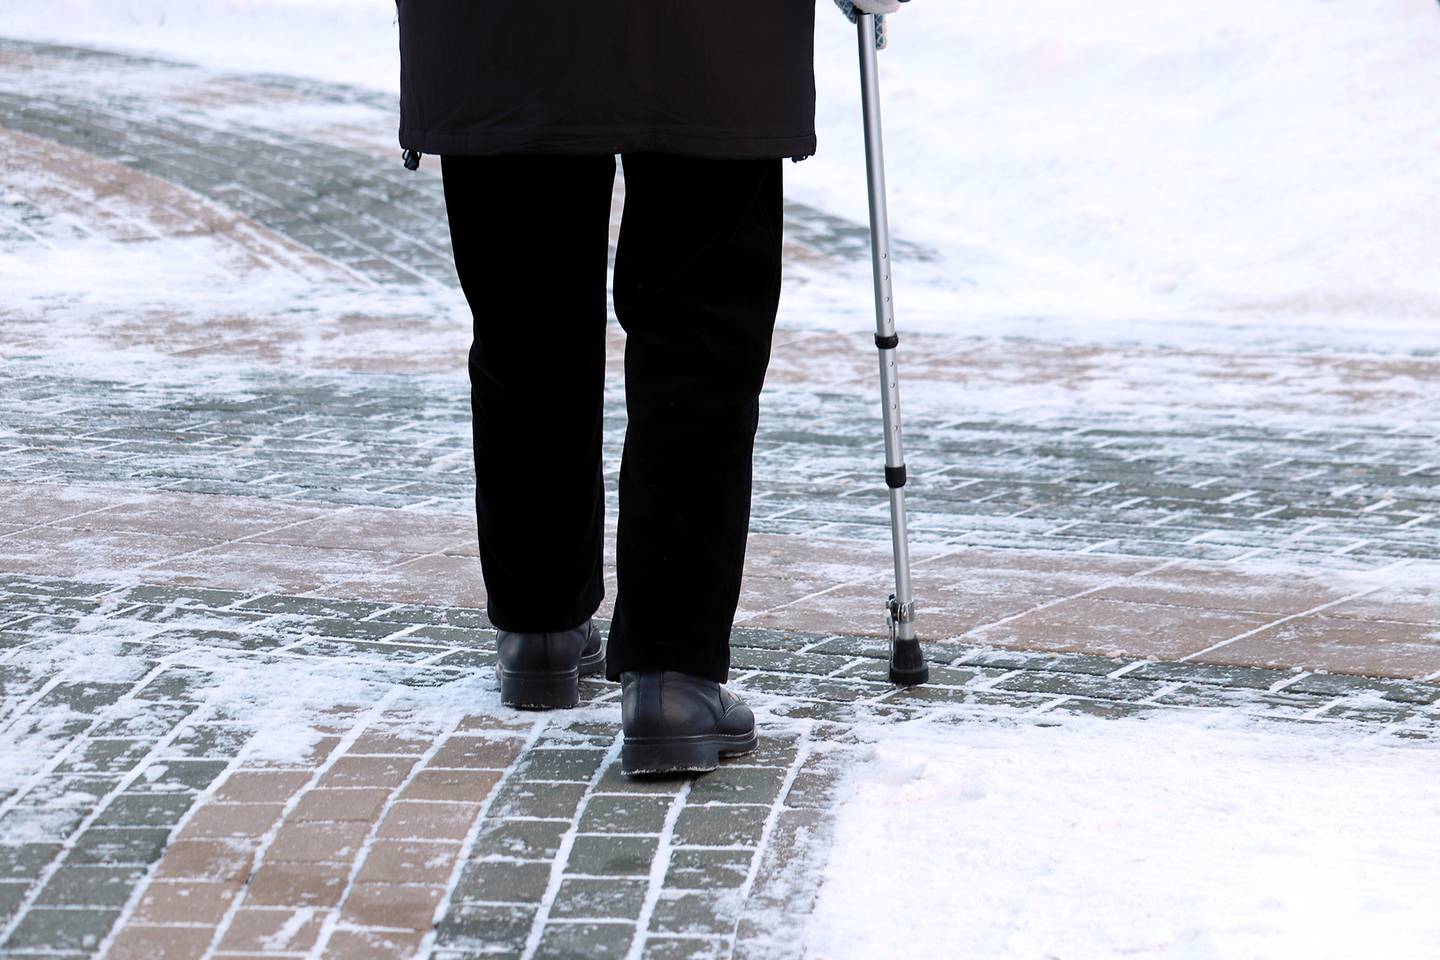 Home Instead - Winter Safety Tips for Seniors: Staying Safe and Warm this Winter Season